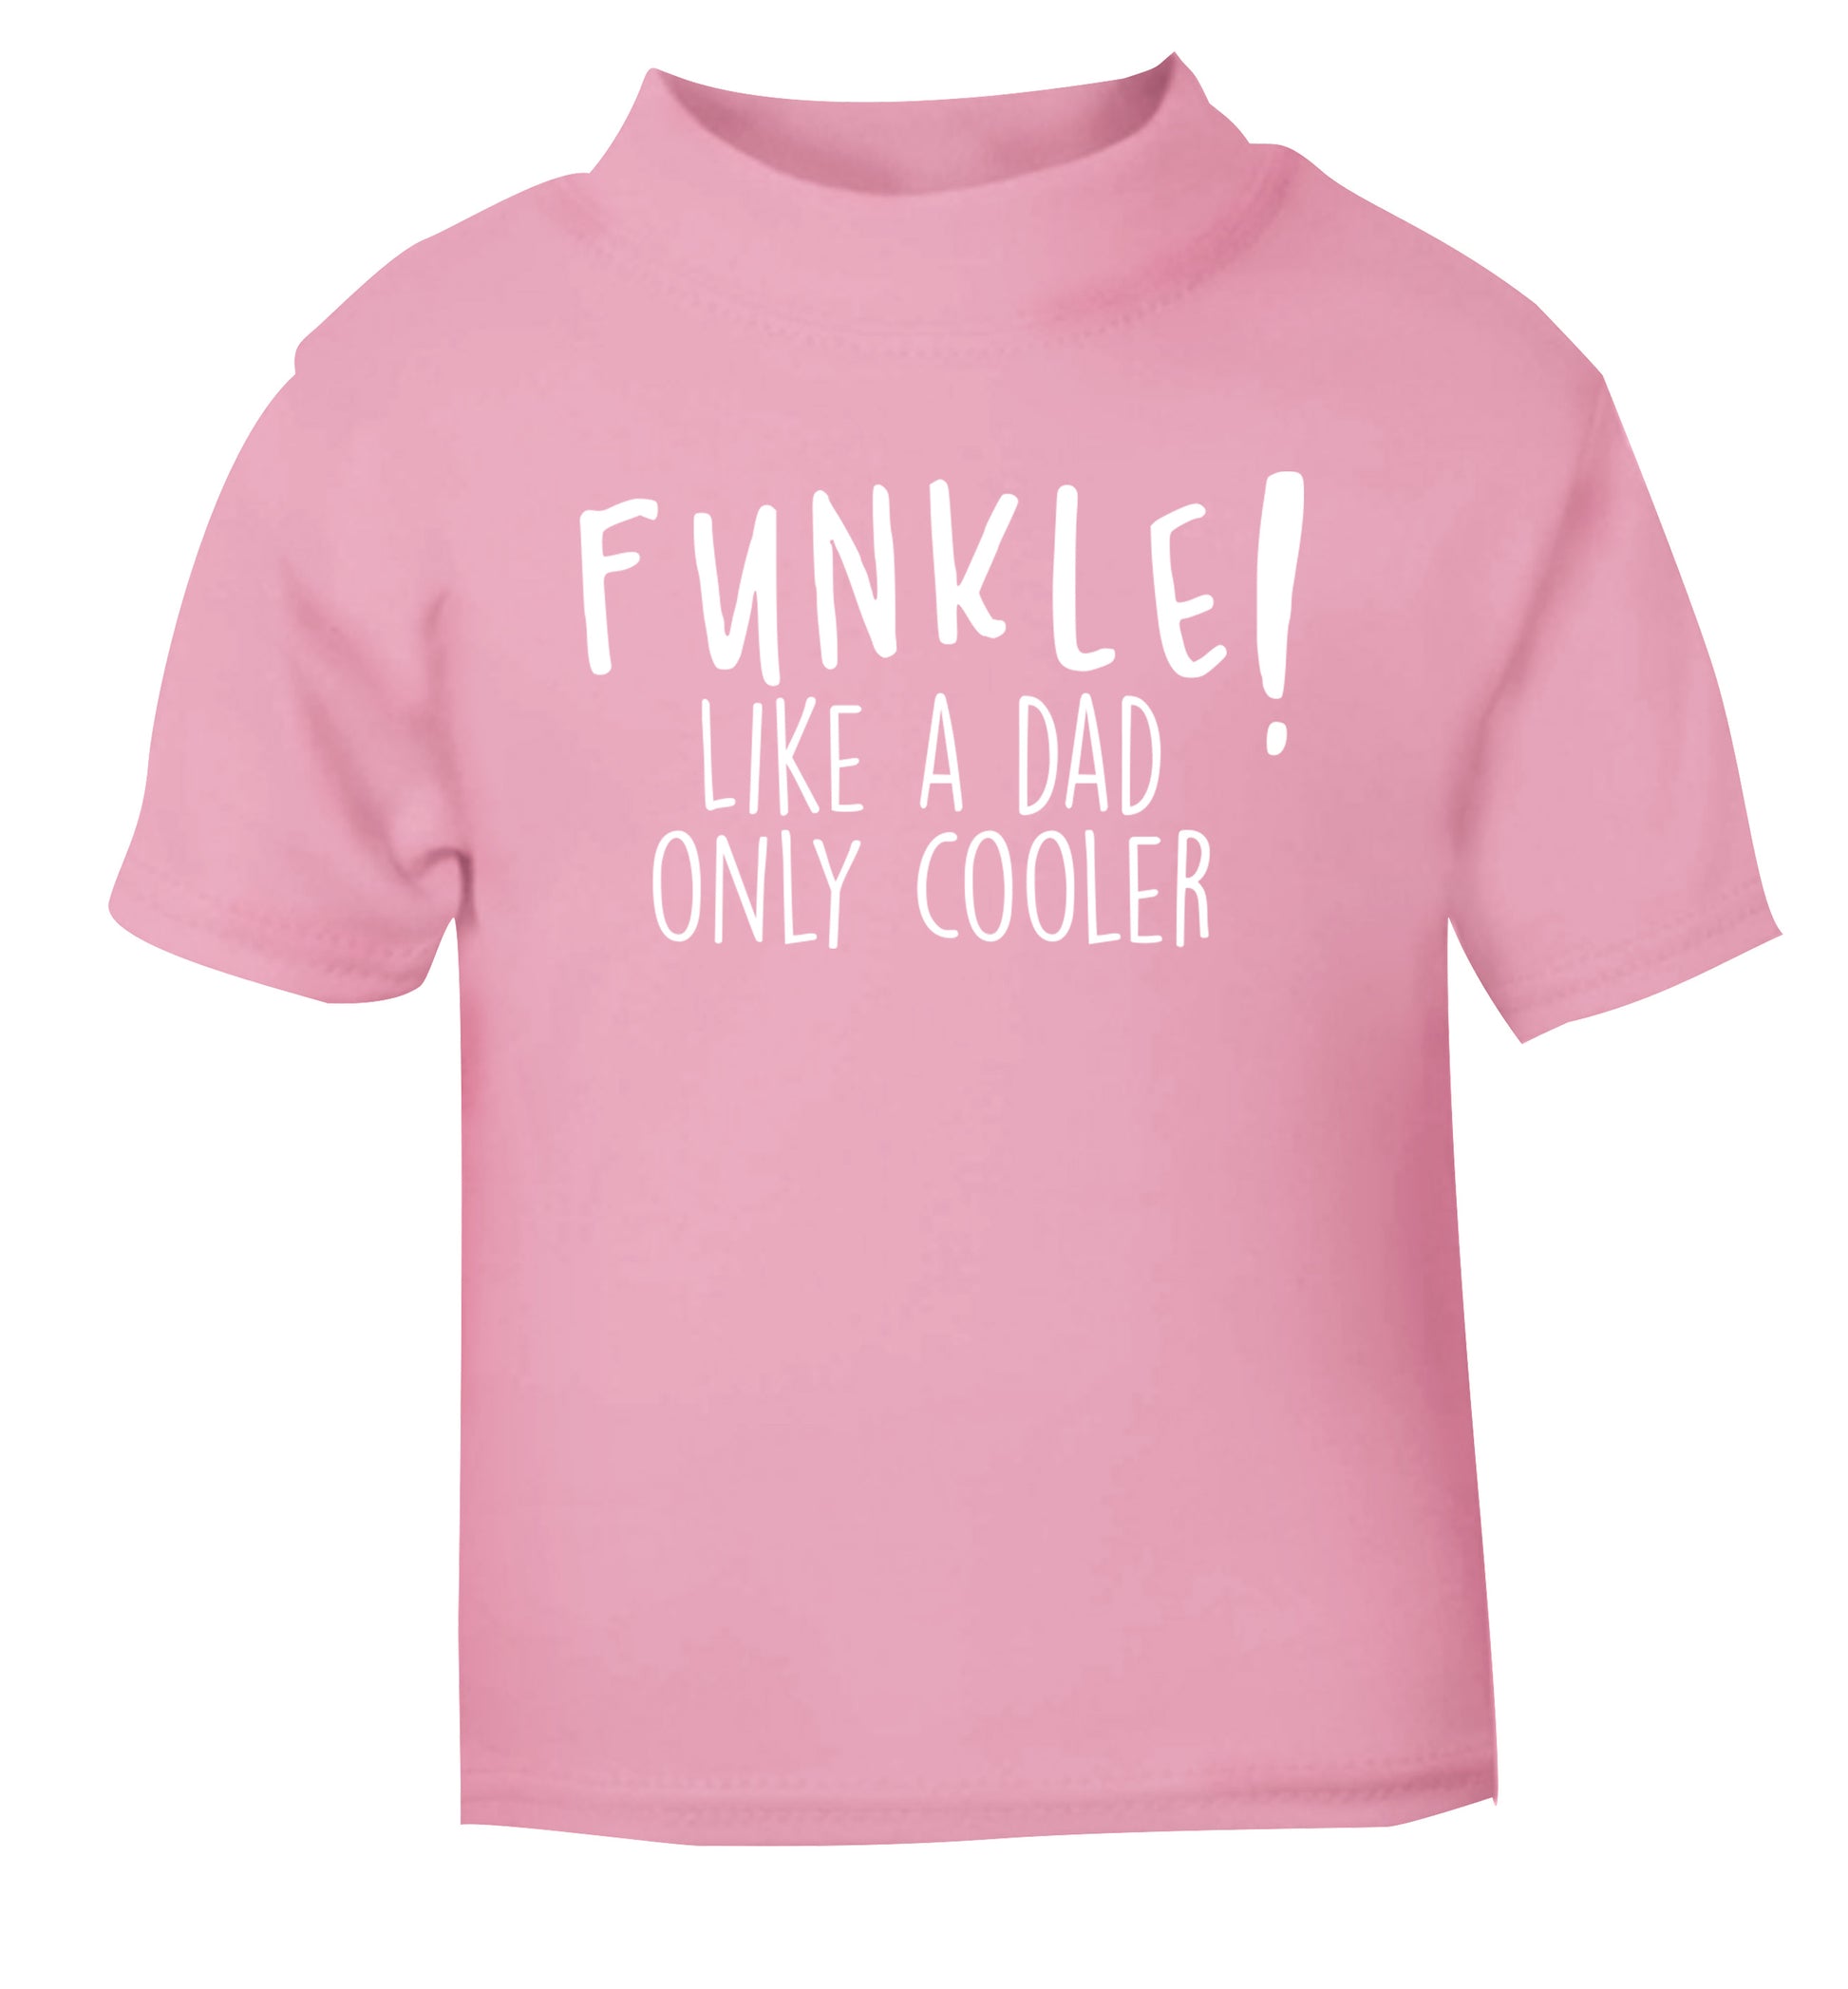 Funkle Like a Dad Only Cooler light pink Baby Toddler Tshirt 2 Years